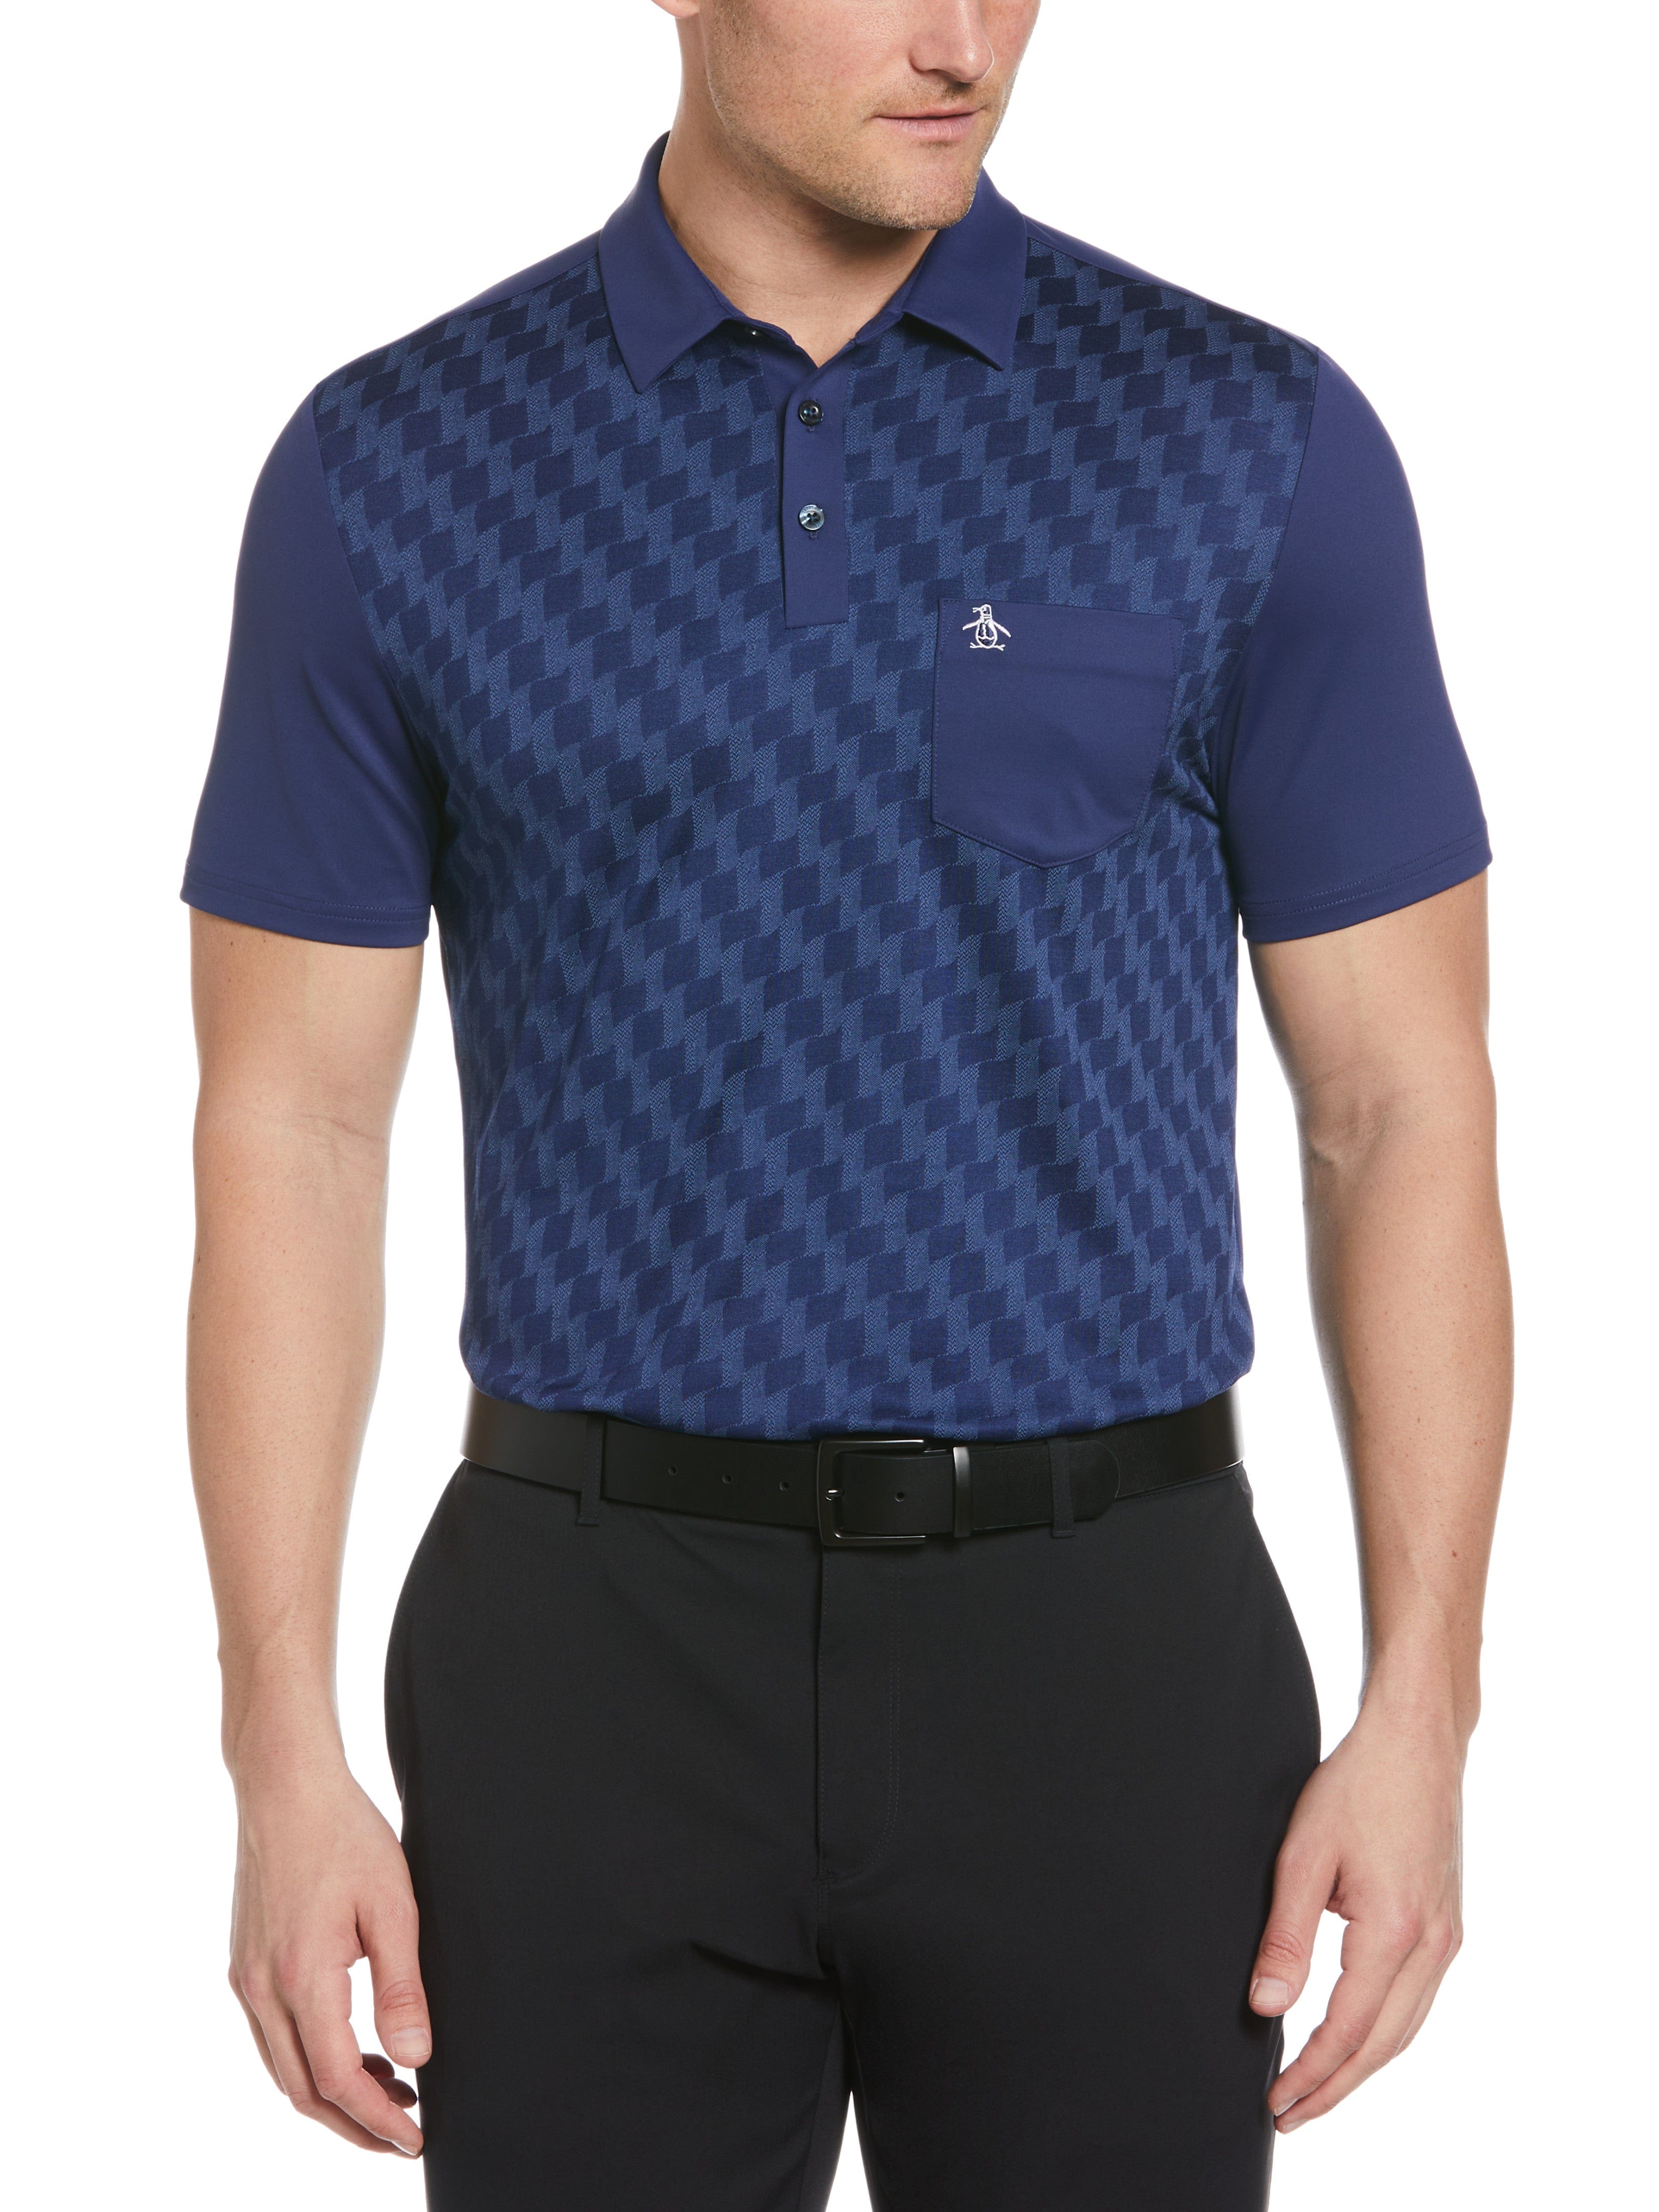 Original Penguin Mens 50s Color Block Print Golf Polo Shirt, Size Small, Astral Night Blue, Polyester/Recycled Polyester/Elastane | Golf Apparel Shop